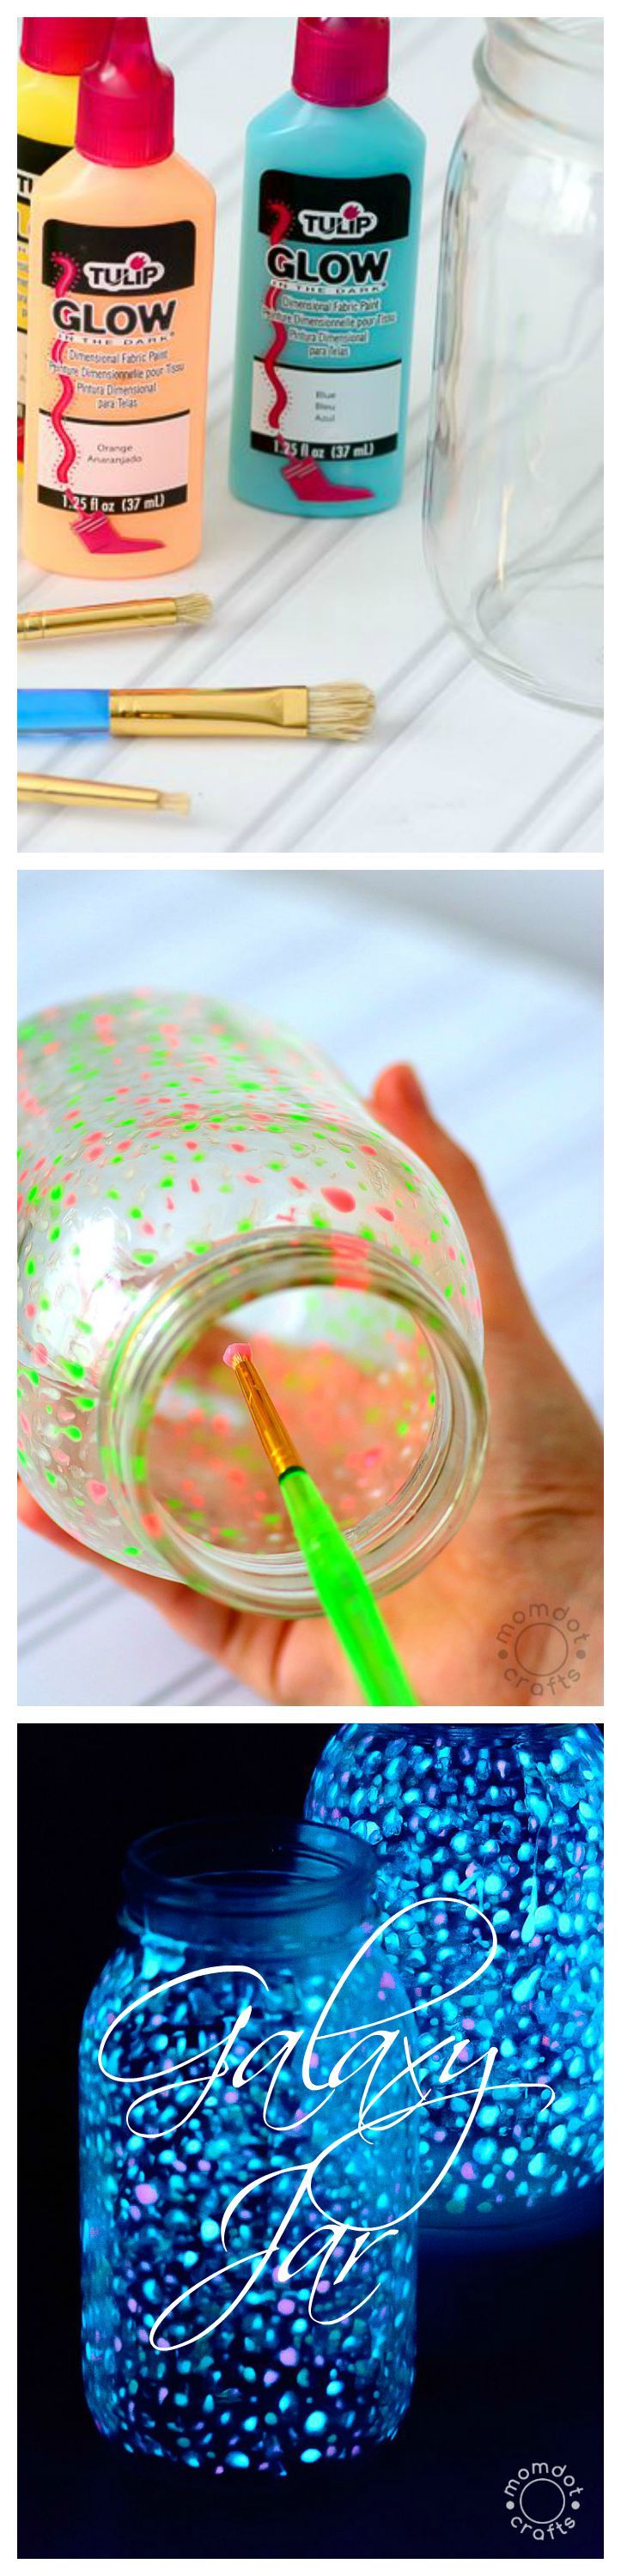 DIY Galaxy Jar, hold the whole galaxy in your hands with this easy craft that will totally capture your kids imagination and wonder. Great for late nights, story times, camping and summer fun!